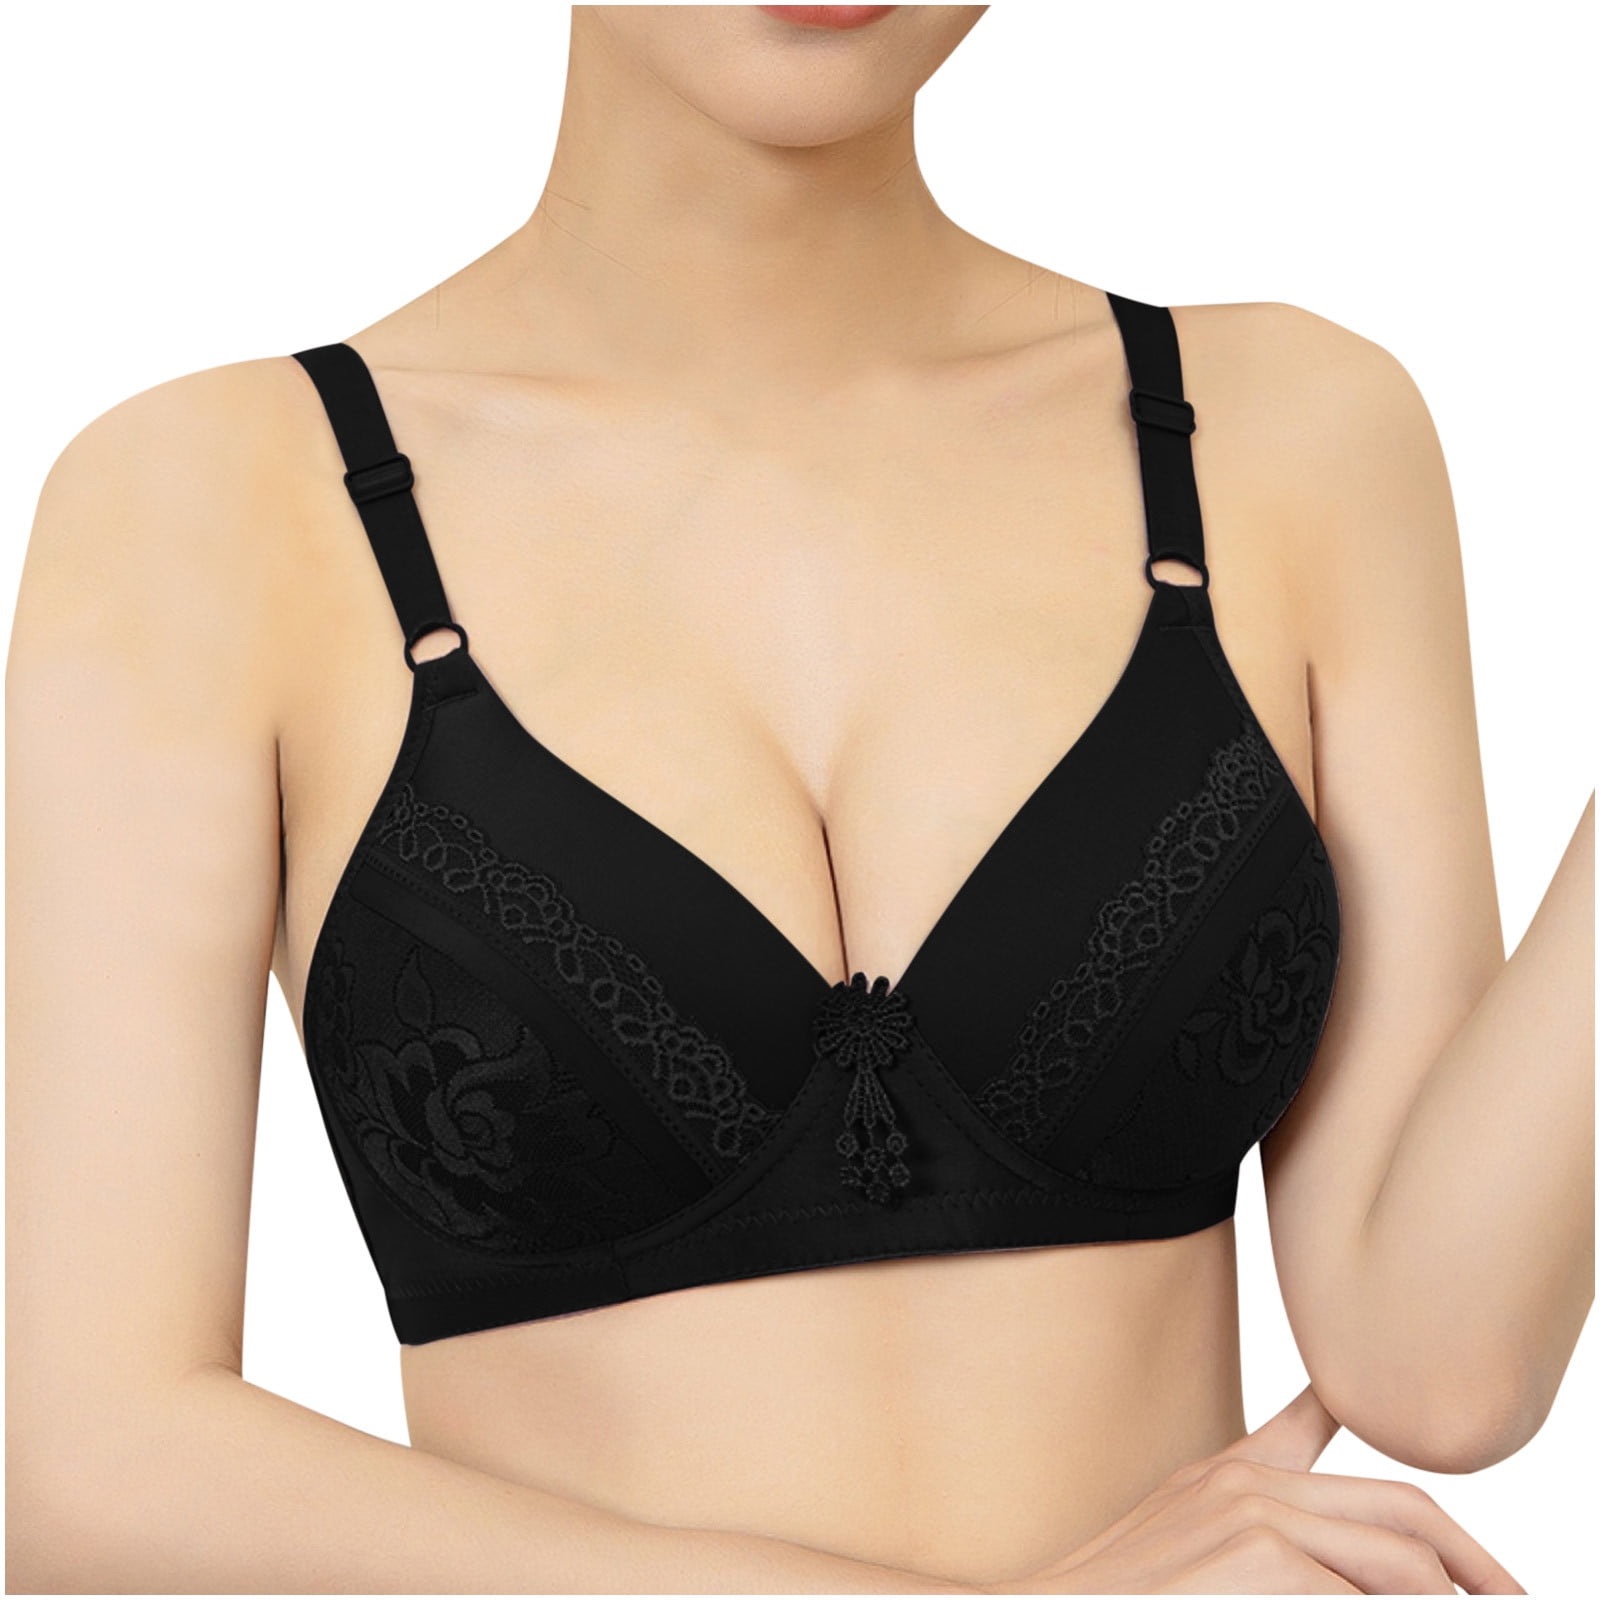 Yesbay Invisible Strap Breast Enhancer Self Adhesive Silicone Push Bra Size  A B C D Up 3